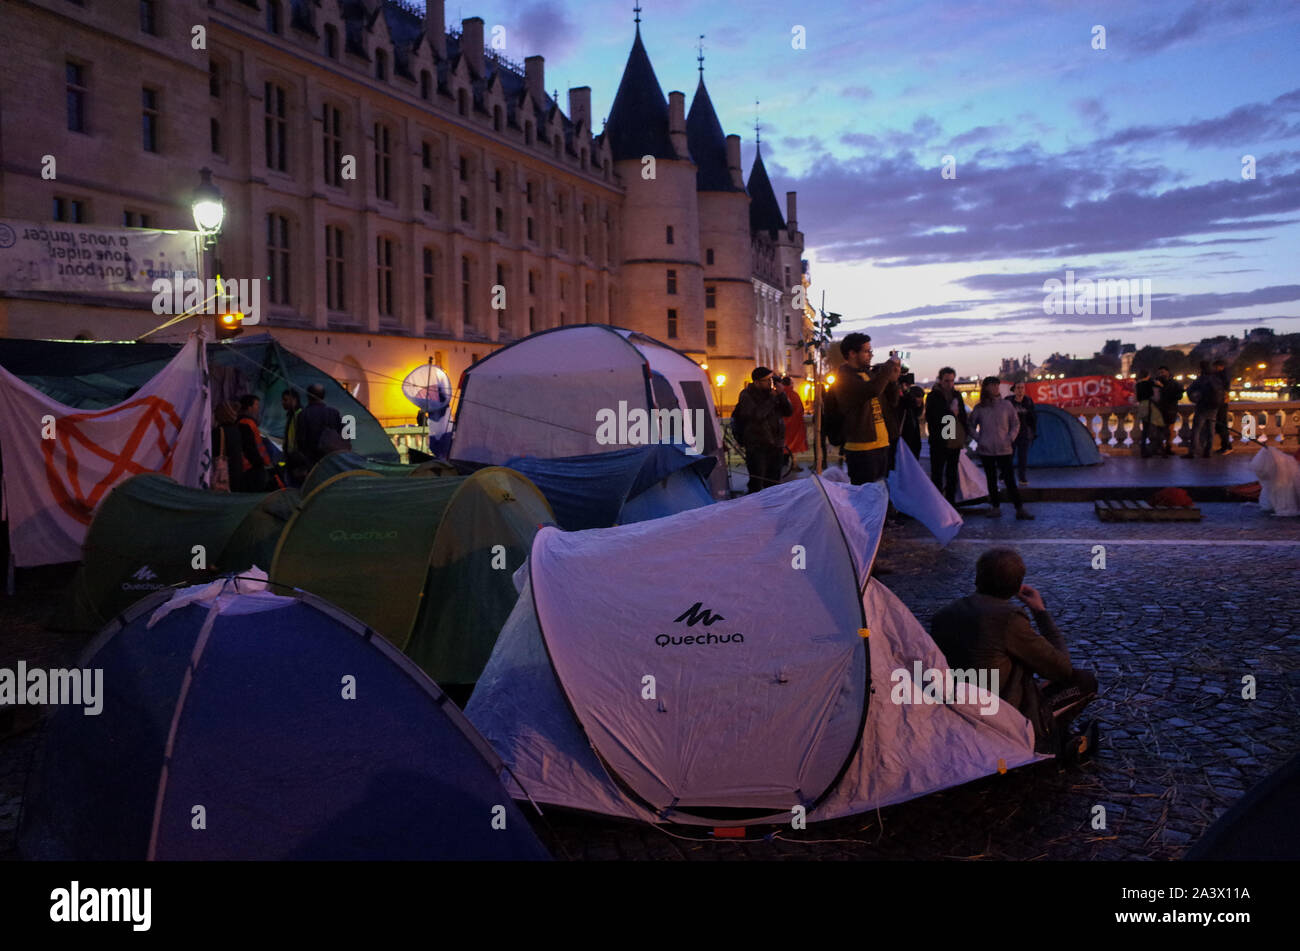 *** STRICTLY NO SALES TO FRENCH MEDIA OR PUBLISHERS *** October 08, 2019 - Paris, France: Activists from  Extinction Rebellion enter their second night of occupation at their protest camp in Place du Chatelet in central Paris as part of their global environment protest movement. Stock Photo